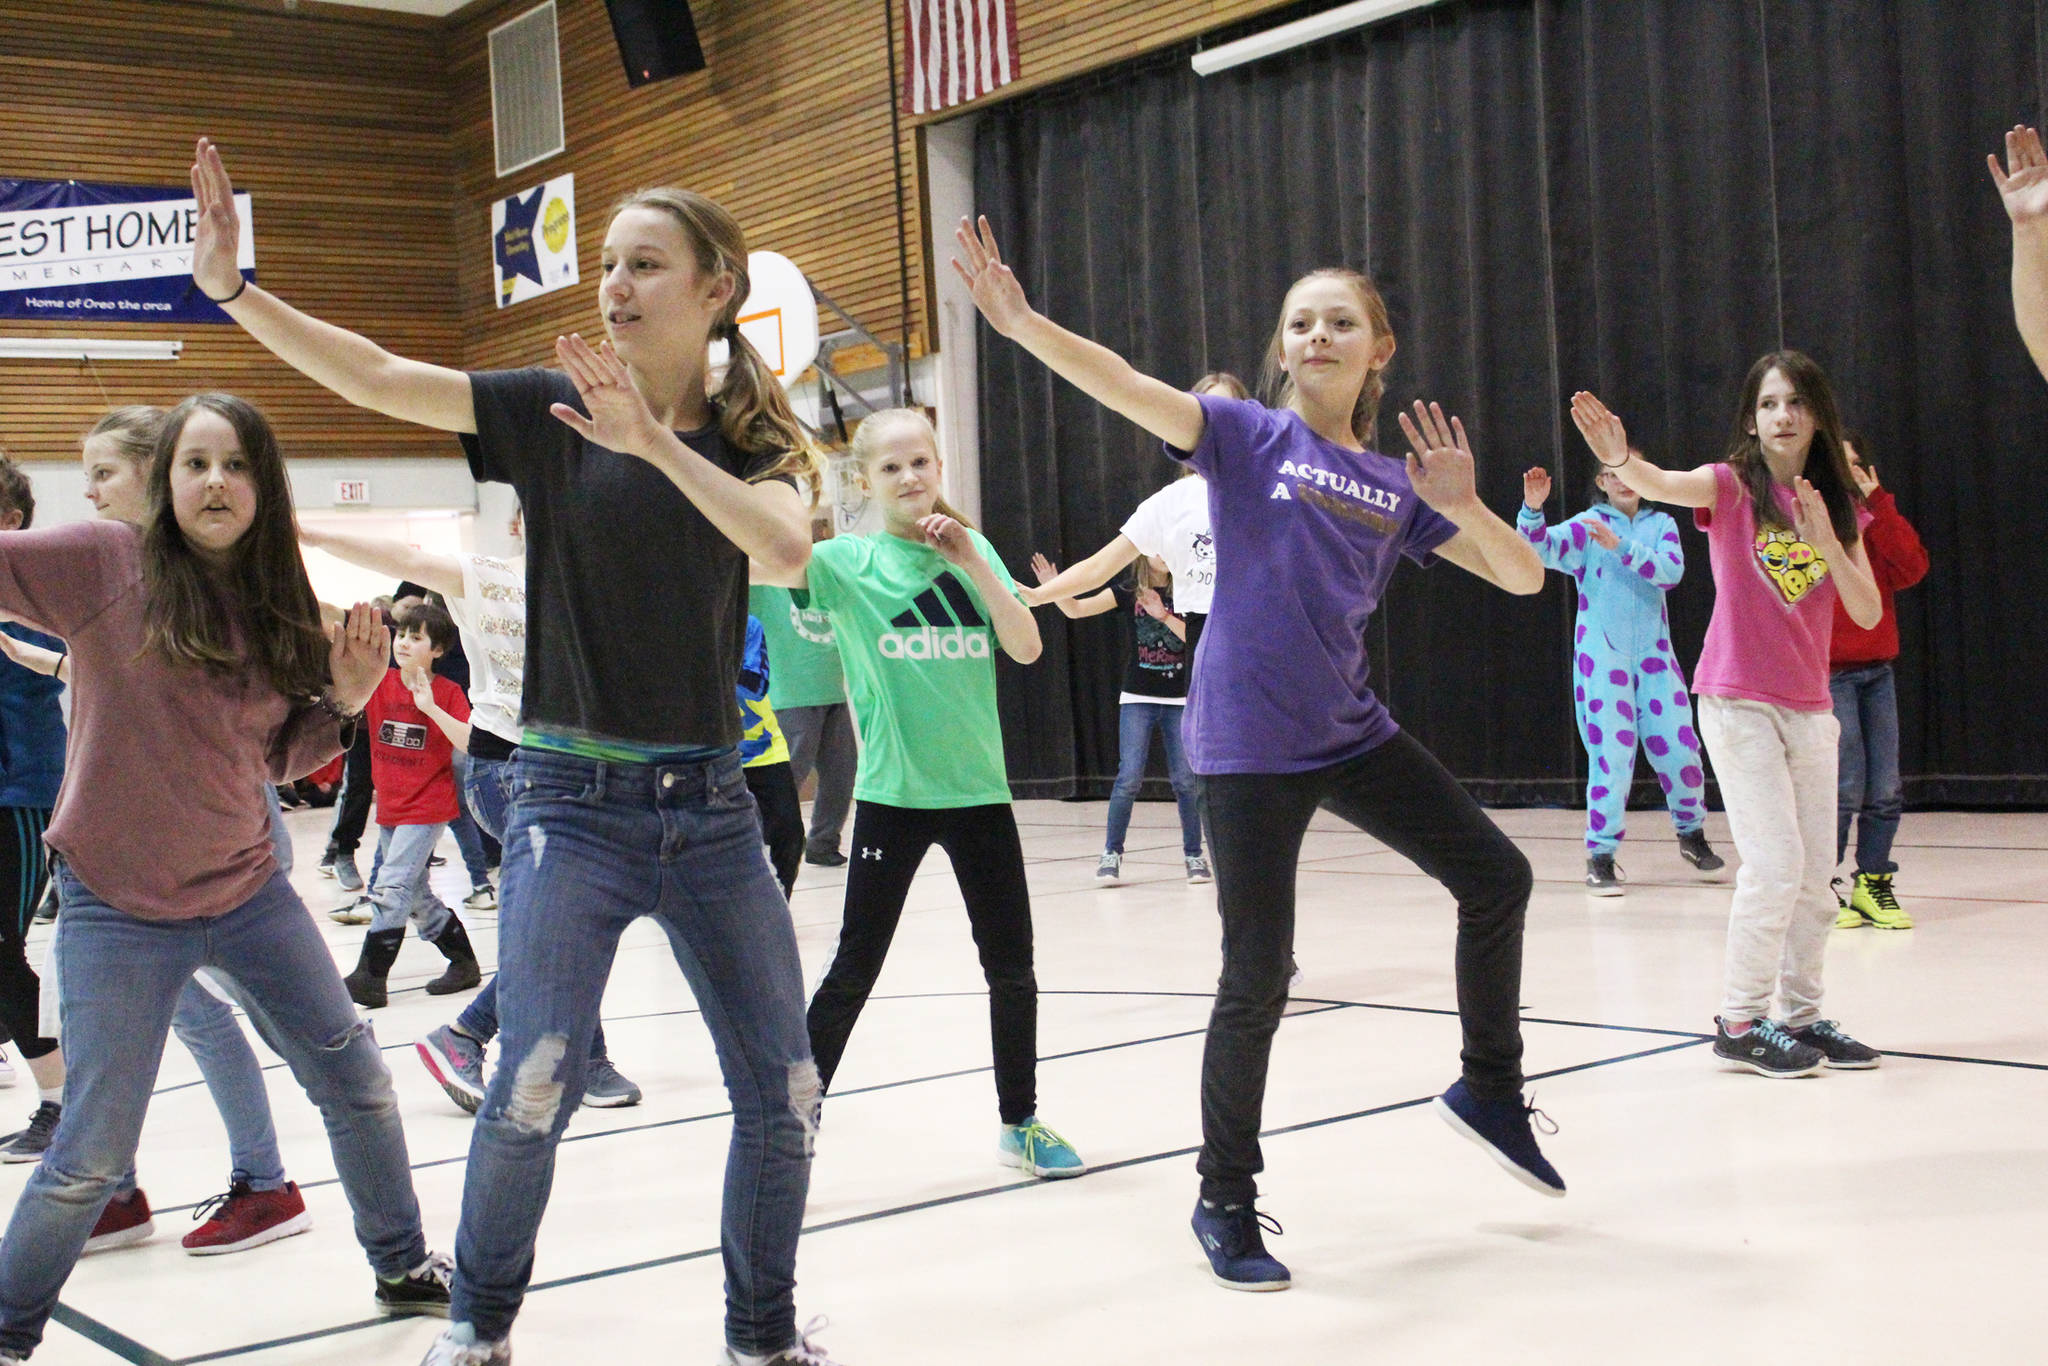 Students perform one o the dances they learned from Artist in the School resident Jocelyn Shiro during a recital for parents Friday, Feb. 23, 2018 at West Homer Elementary School in Homer, Alaska. (Photo by Megan Pacer/Homer News)